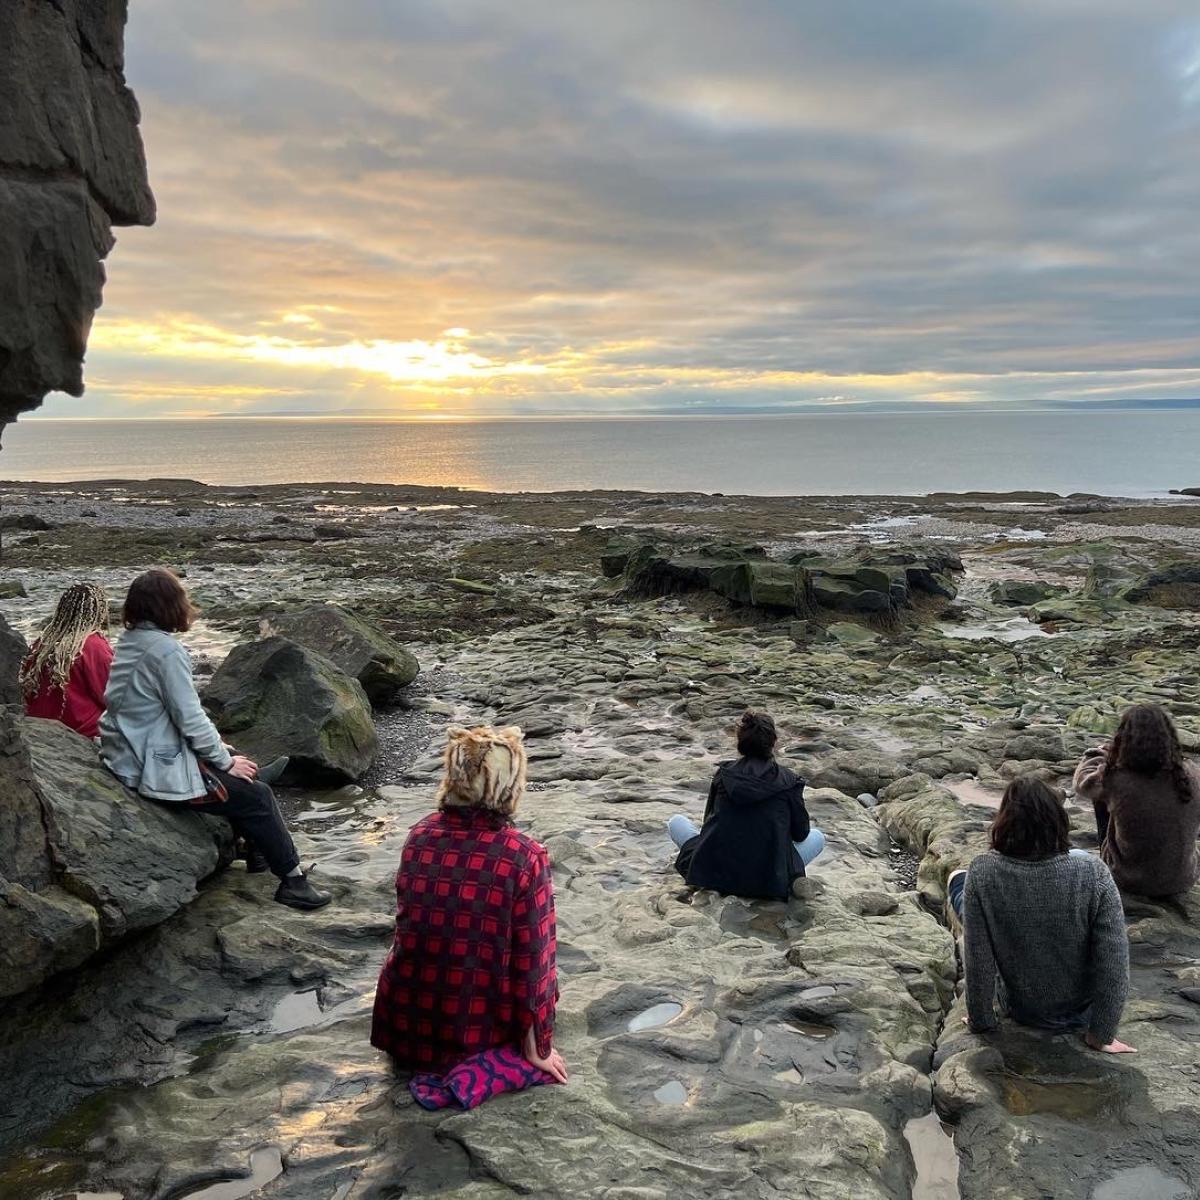 A group sits on a rocky shore watching the sunset over the ocean